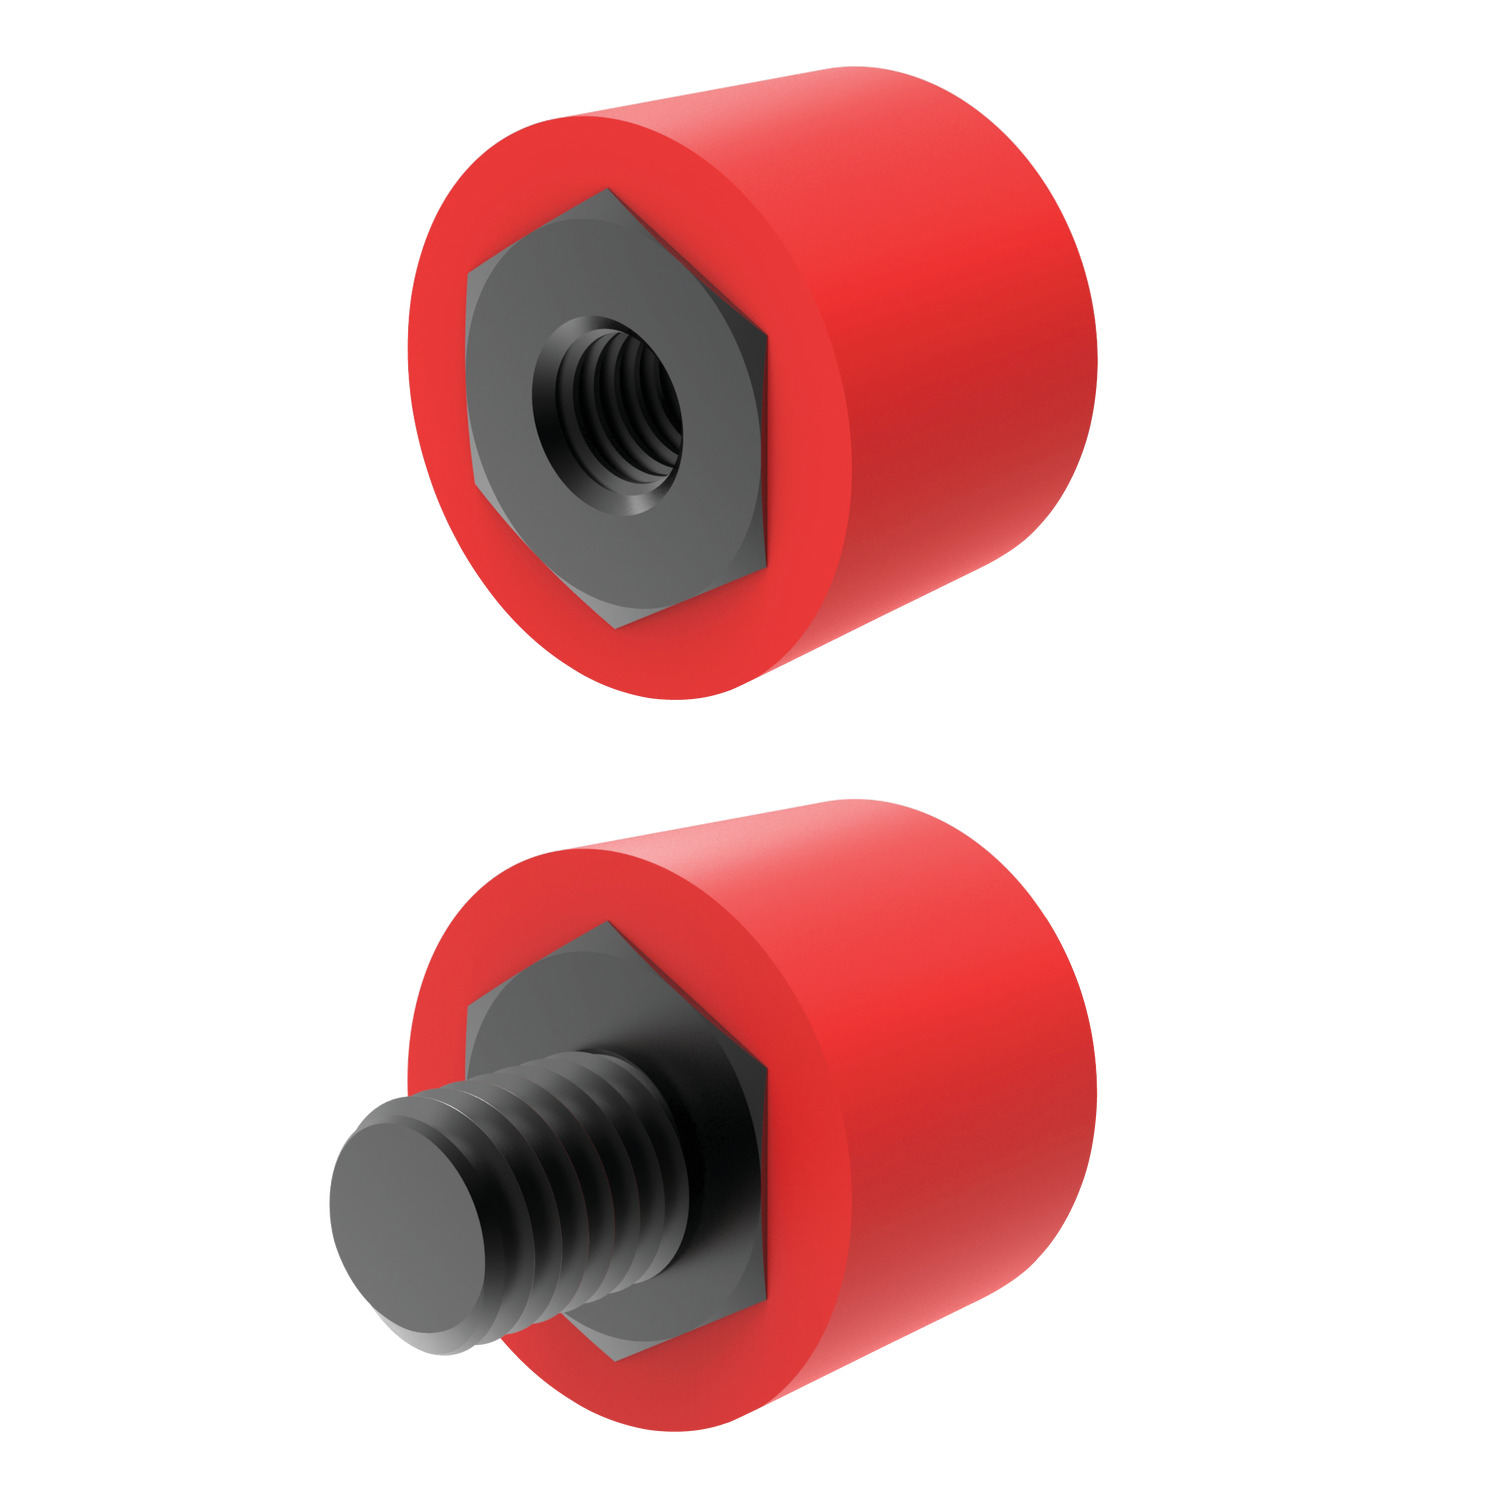 Metric Bumpers - Round Metric round bumpers and stops in a variety of configurations.
 Steel core with black neoprene or urethane moulding.
 Use to guard, stop and align components during assembly.